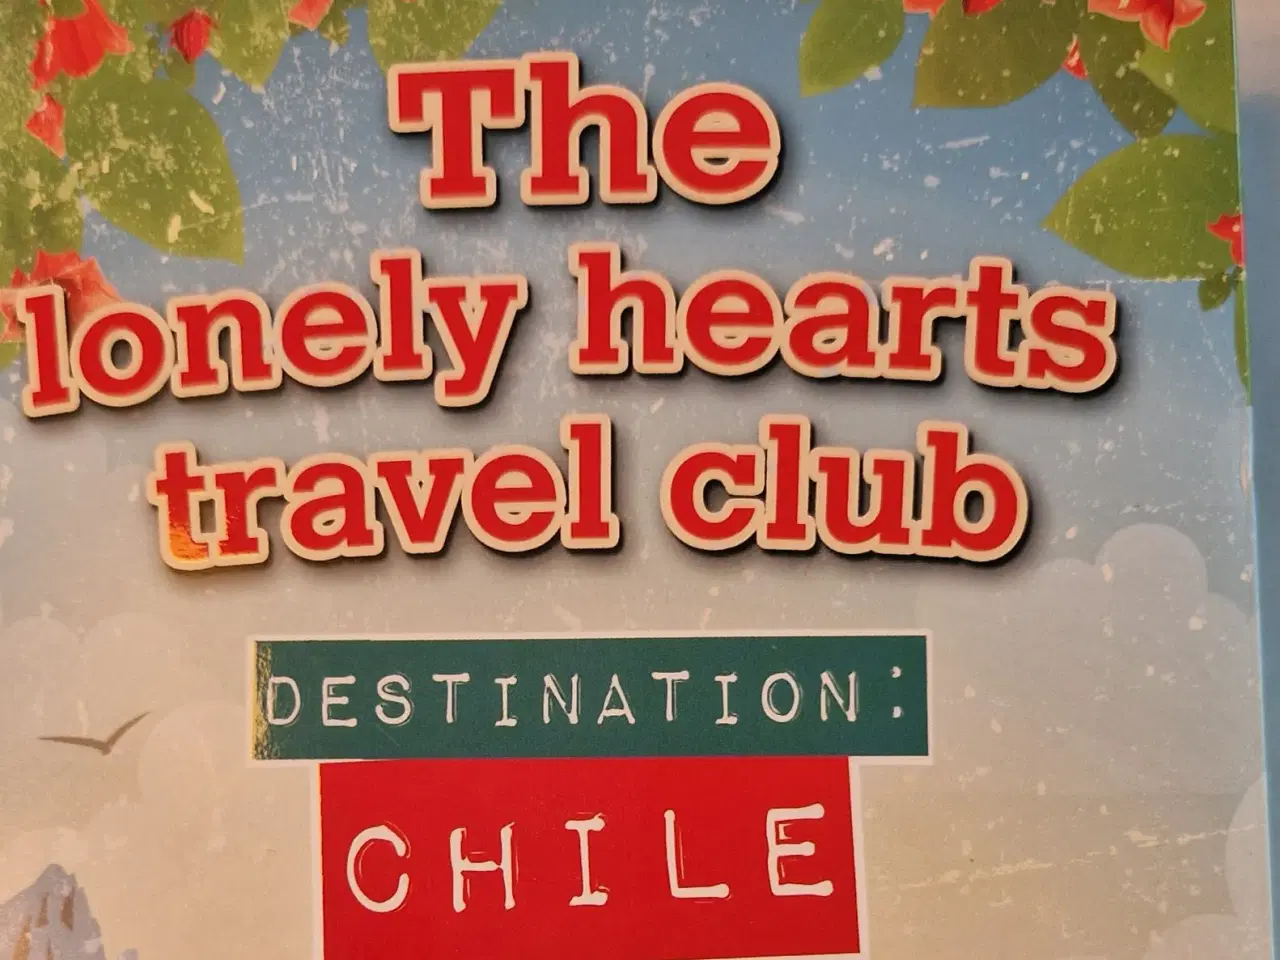 Billede 1 - The lonely hearts Travelocity club Chile, Katy Col